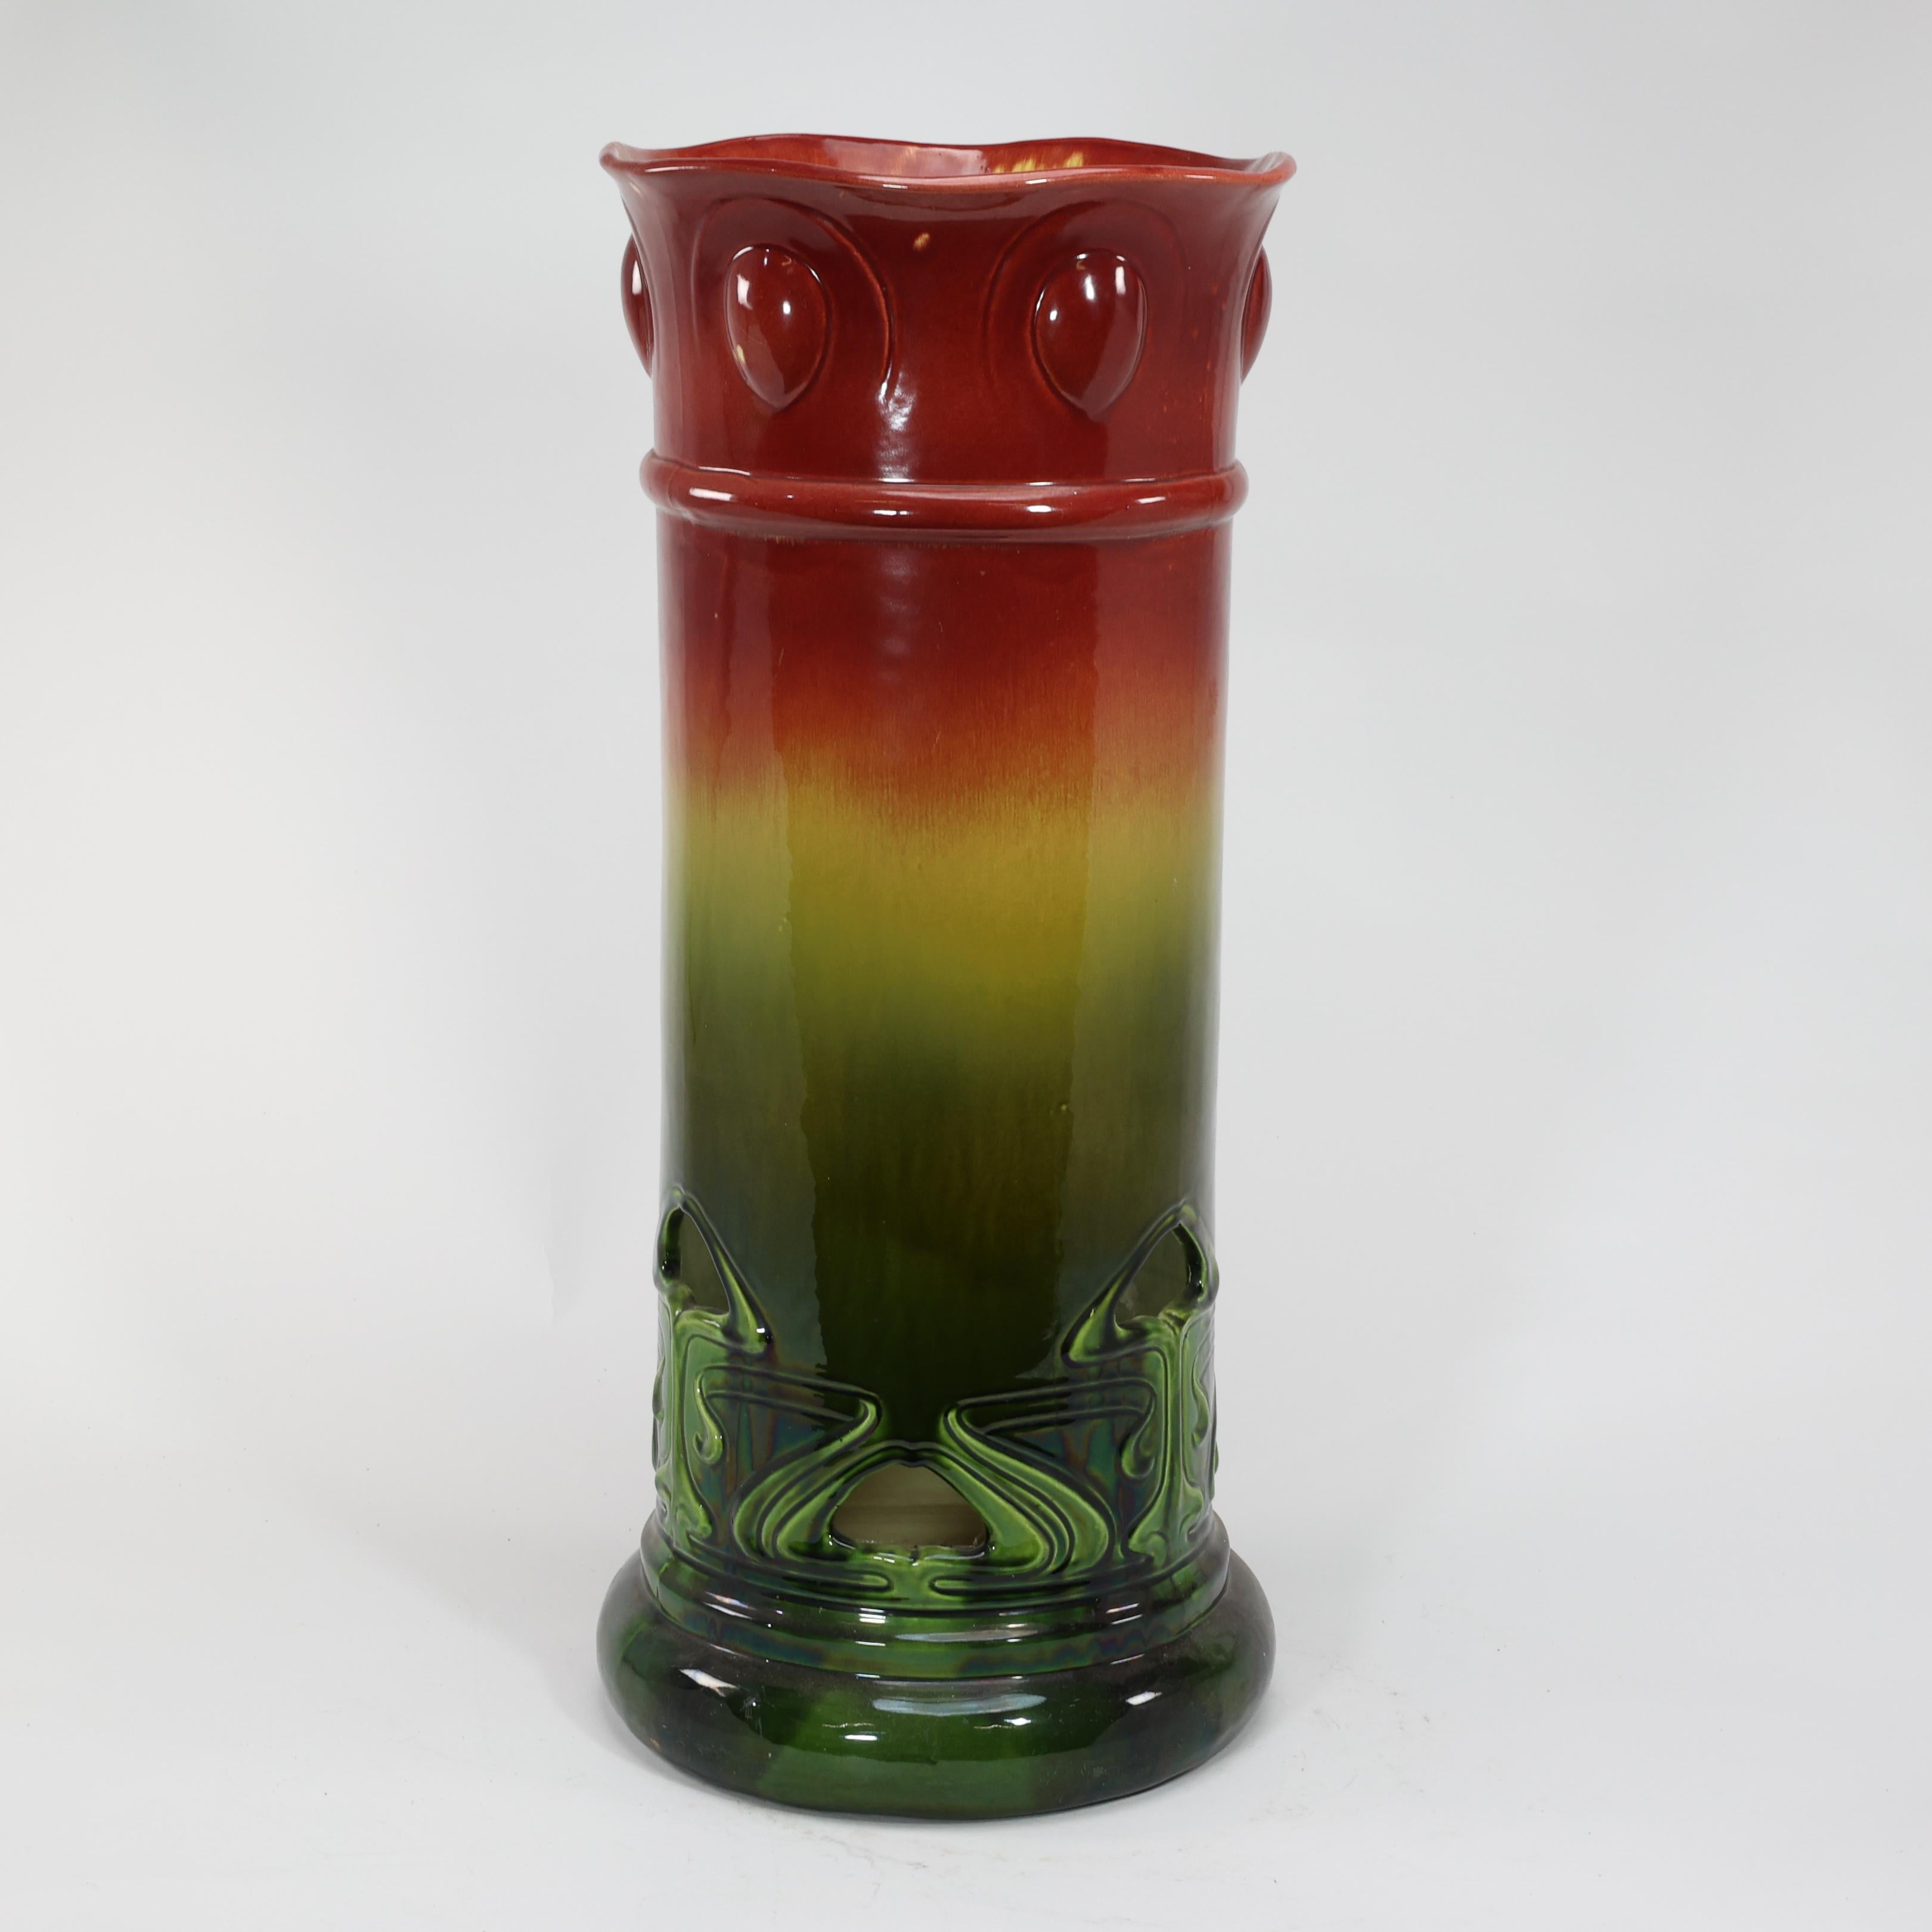 Bretby Art pottery. An Arts and Crafts red and green umbrella and walking stick stand with floral decoration pierced to the base to allow rainwater to dry quickly.